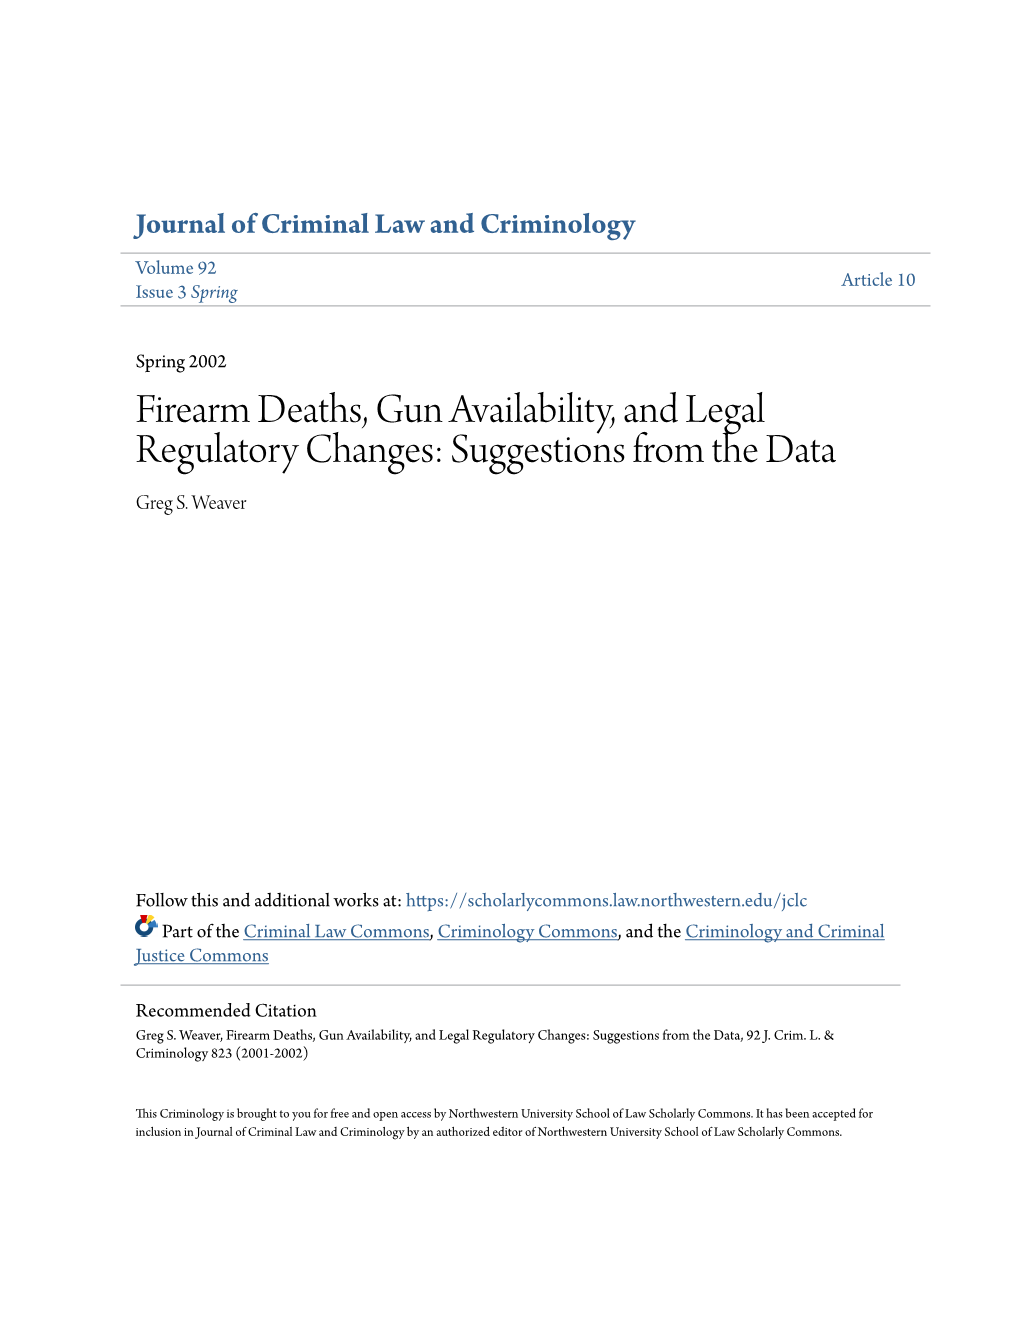 Firearm Deaths, Gun Availability, and Legal Regulatory Changes: Suggestions from the Data Greg S